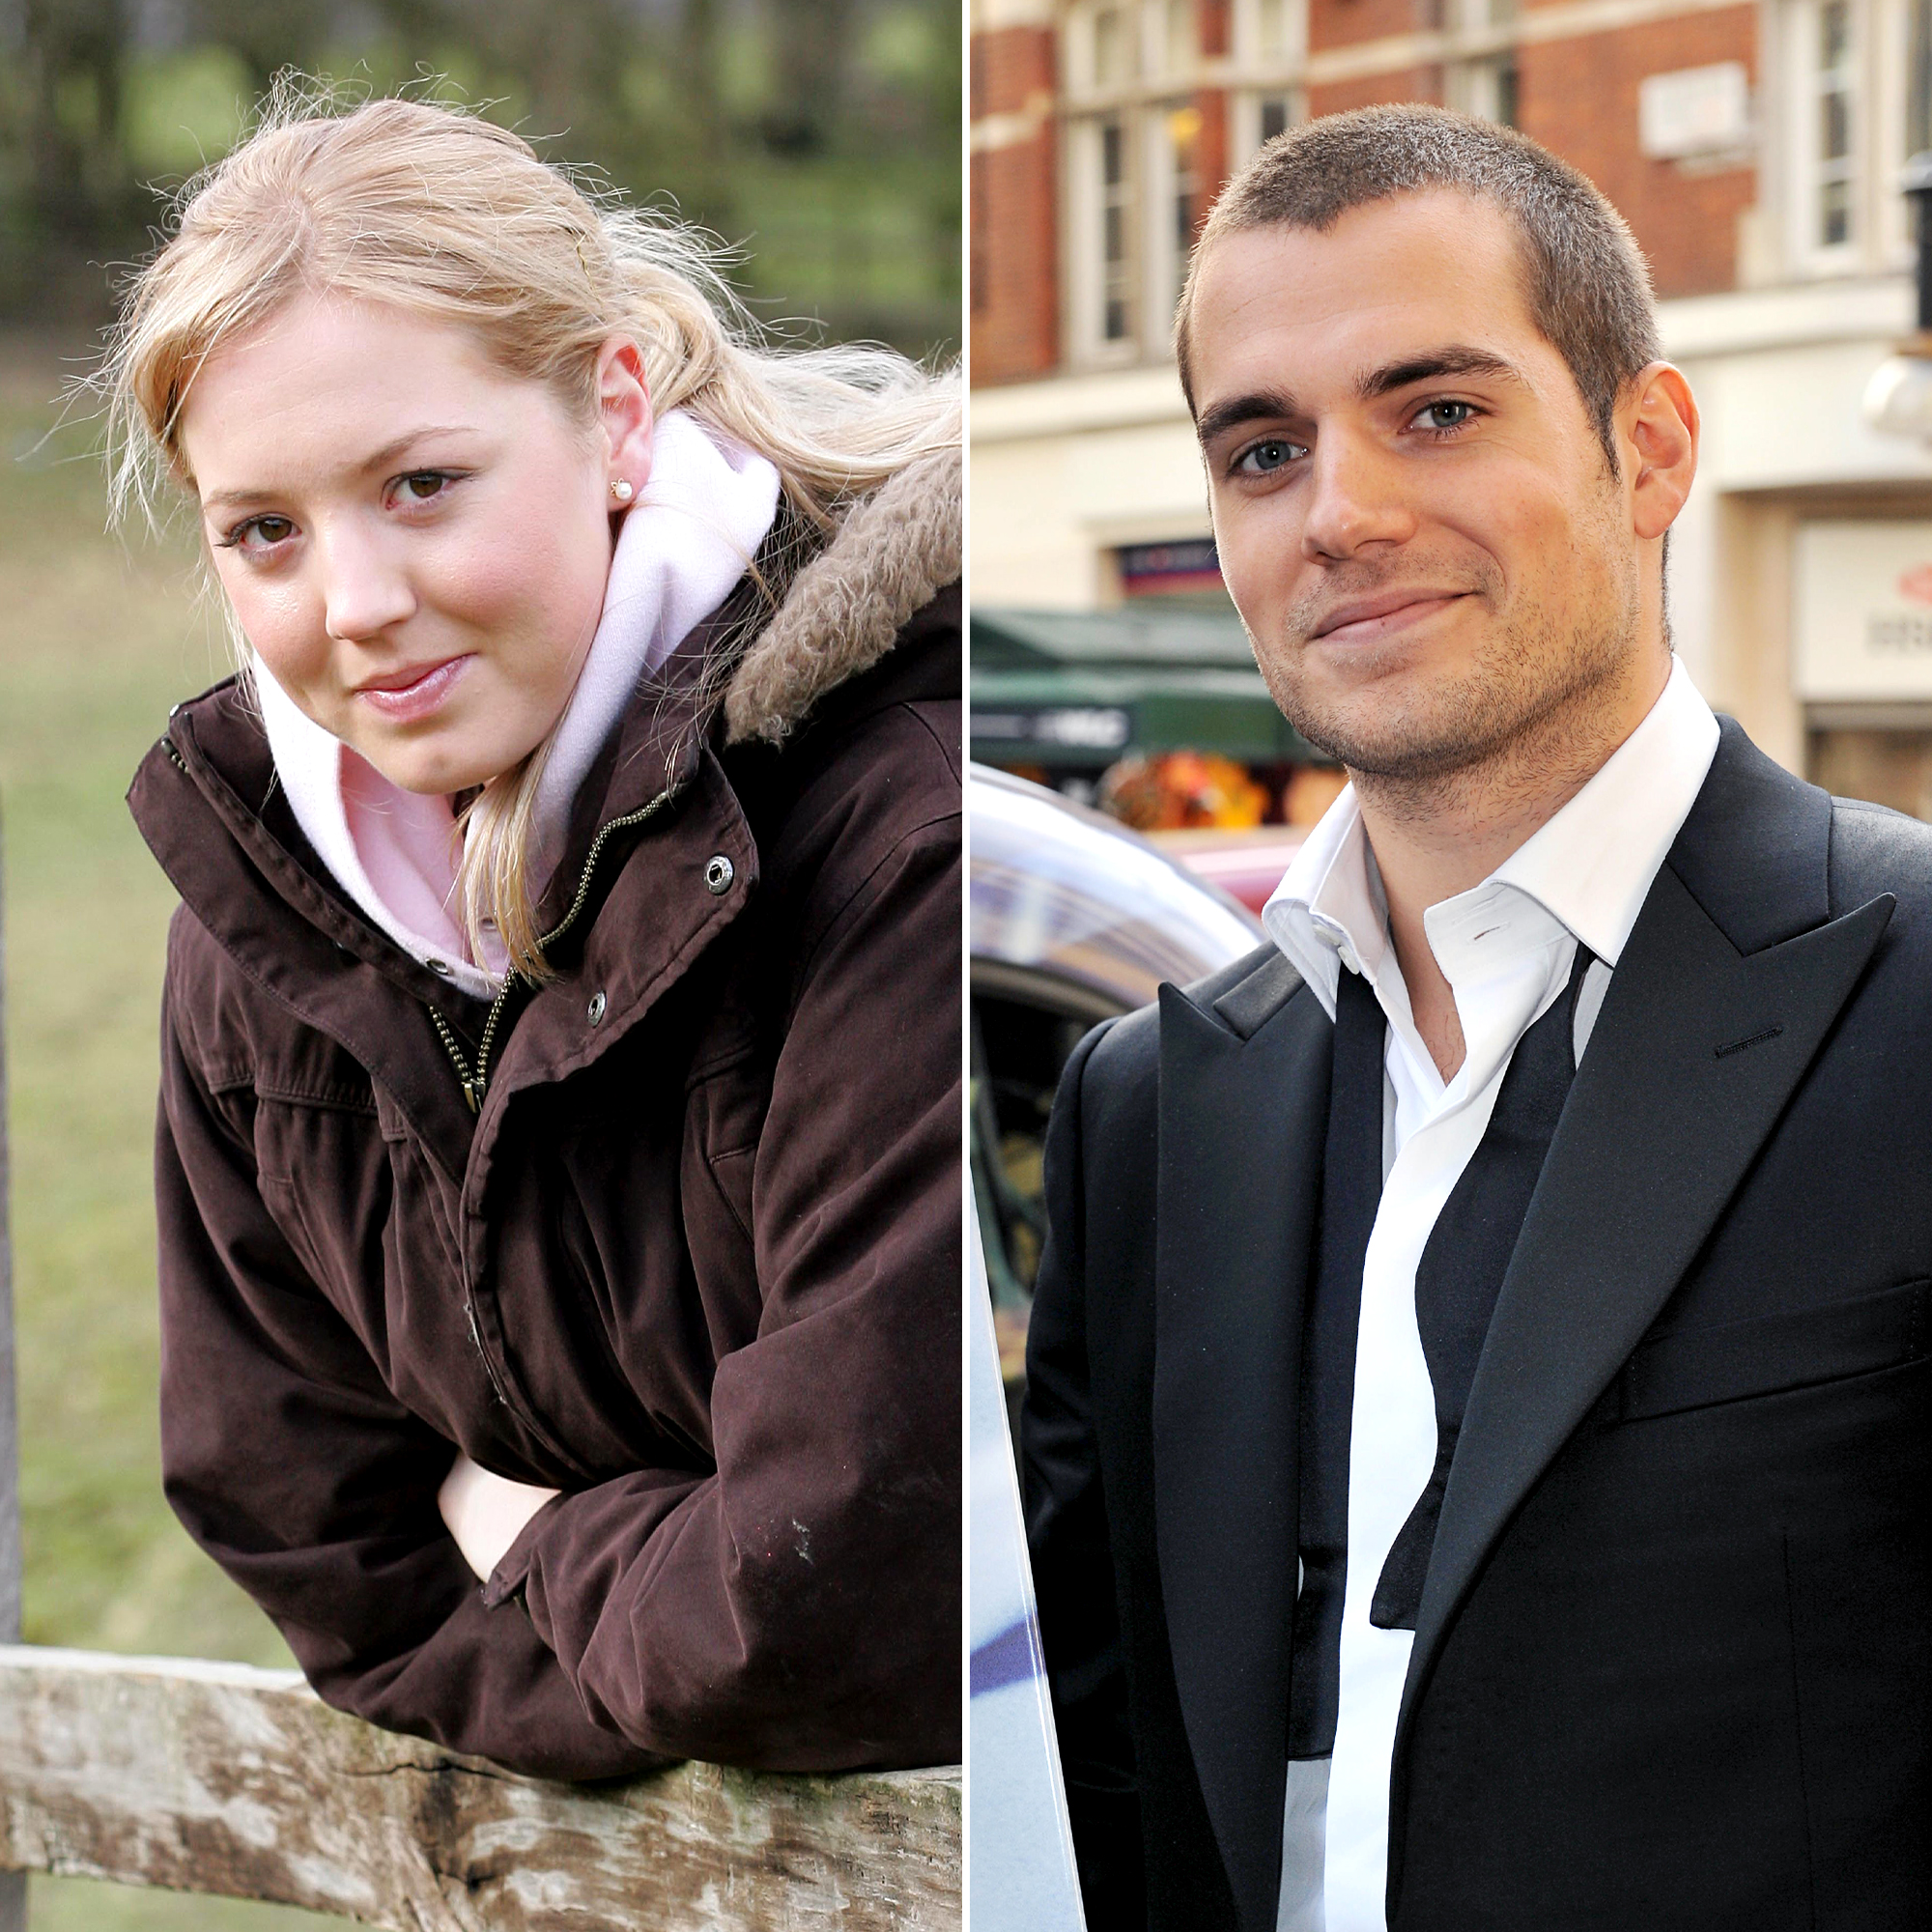 Who Is Henry Cavill Dating?